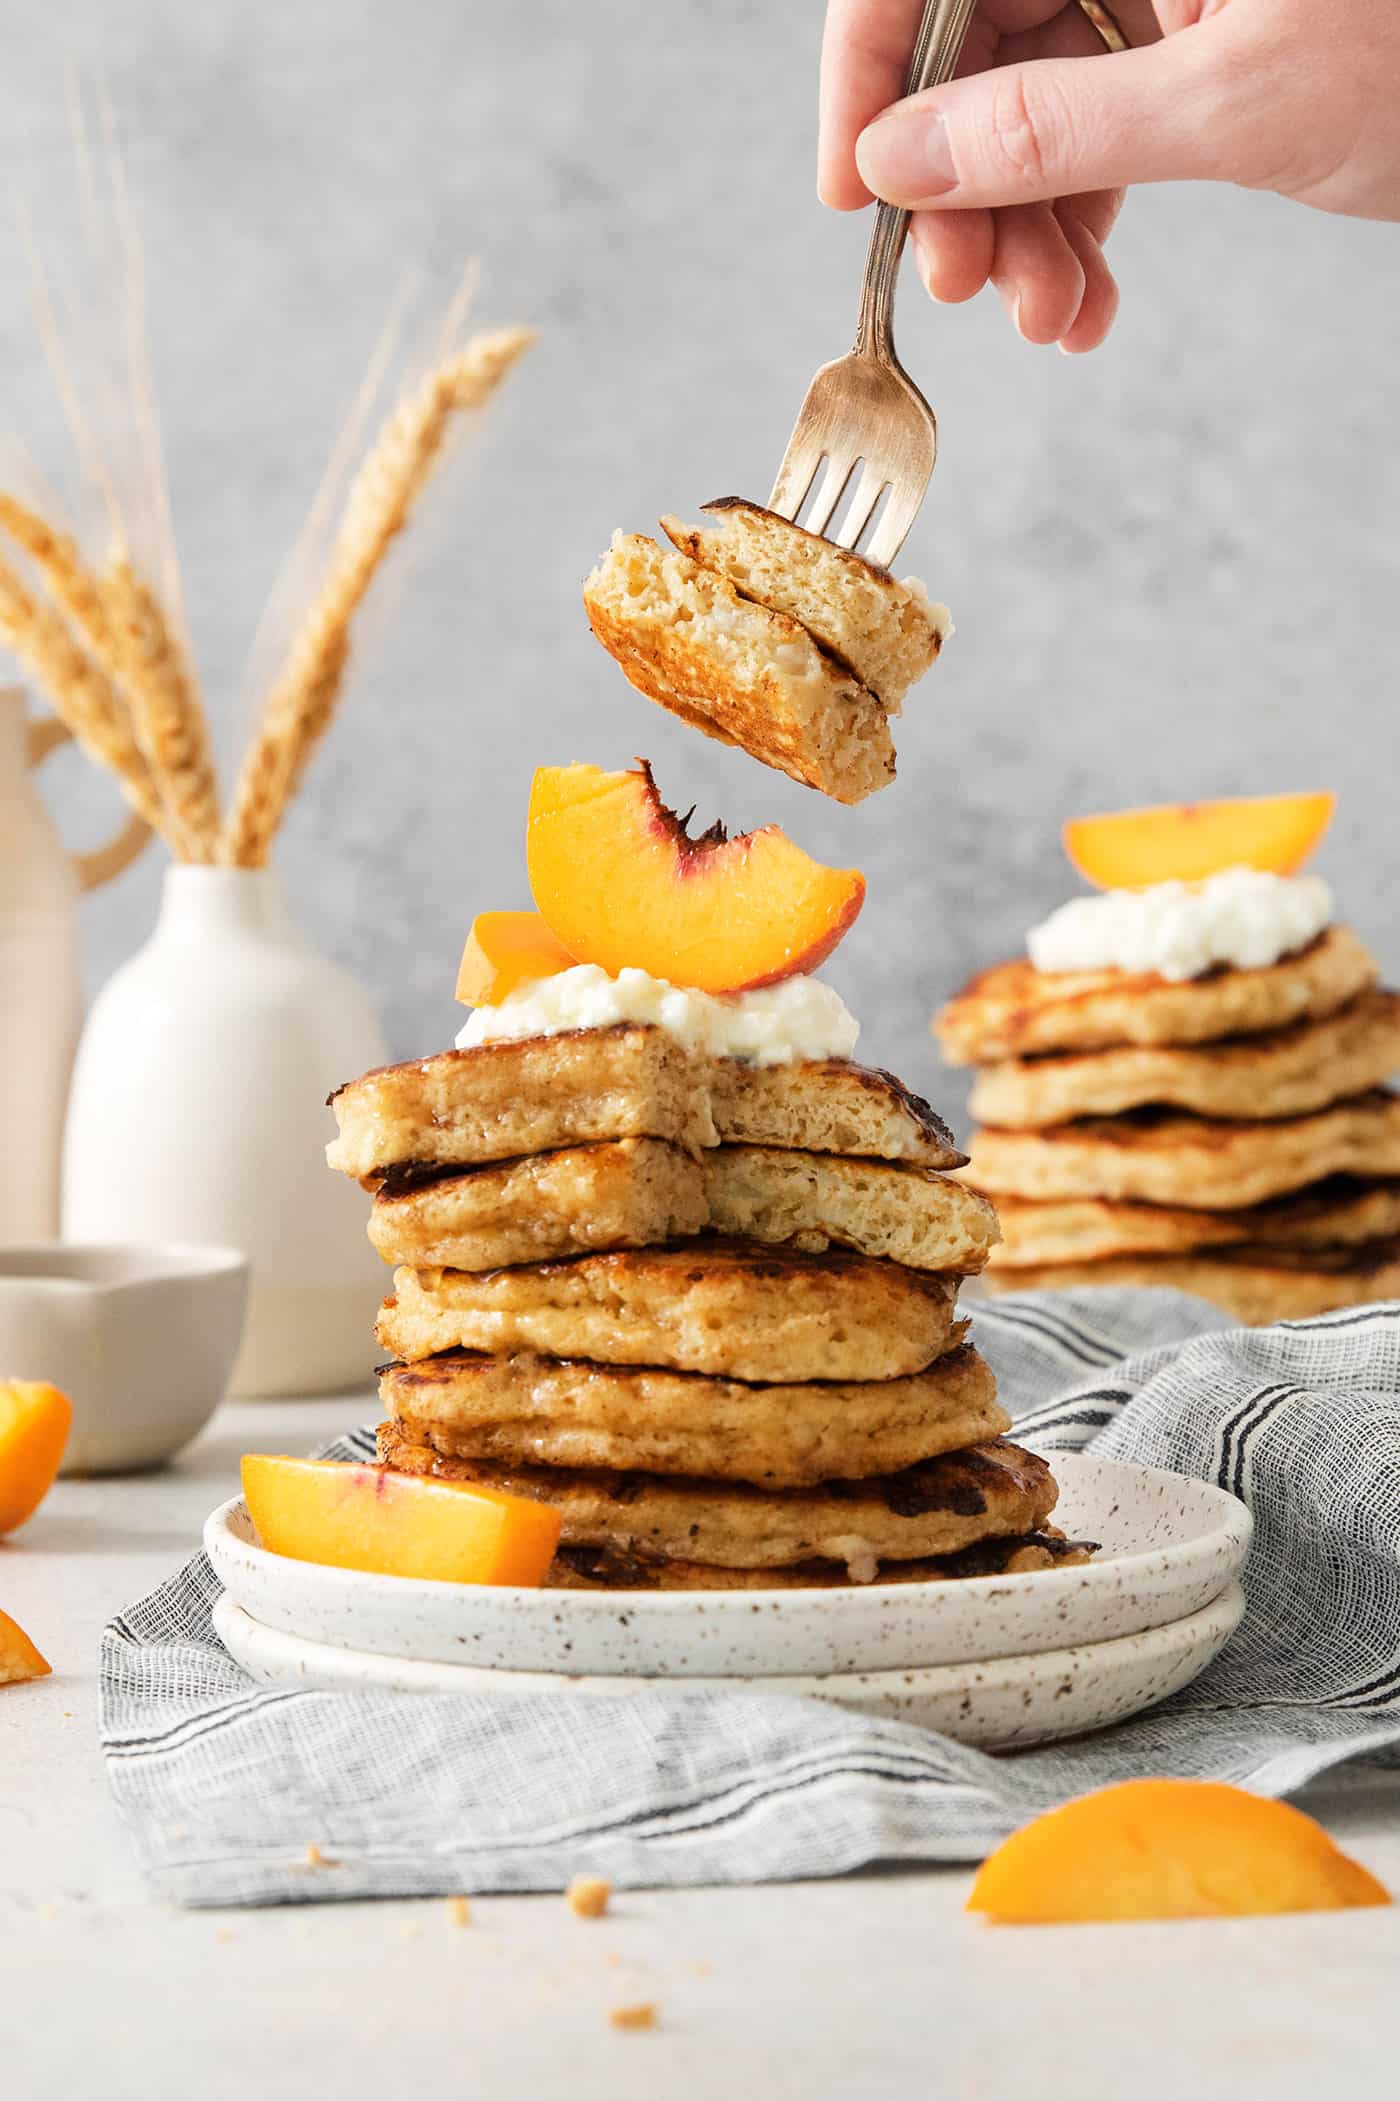 Two bites of cottage cheese pancake are picked up with a fork, with the stack topped with whipped cream and peaches below.